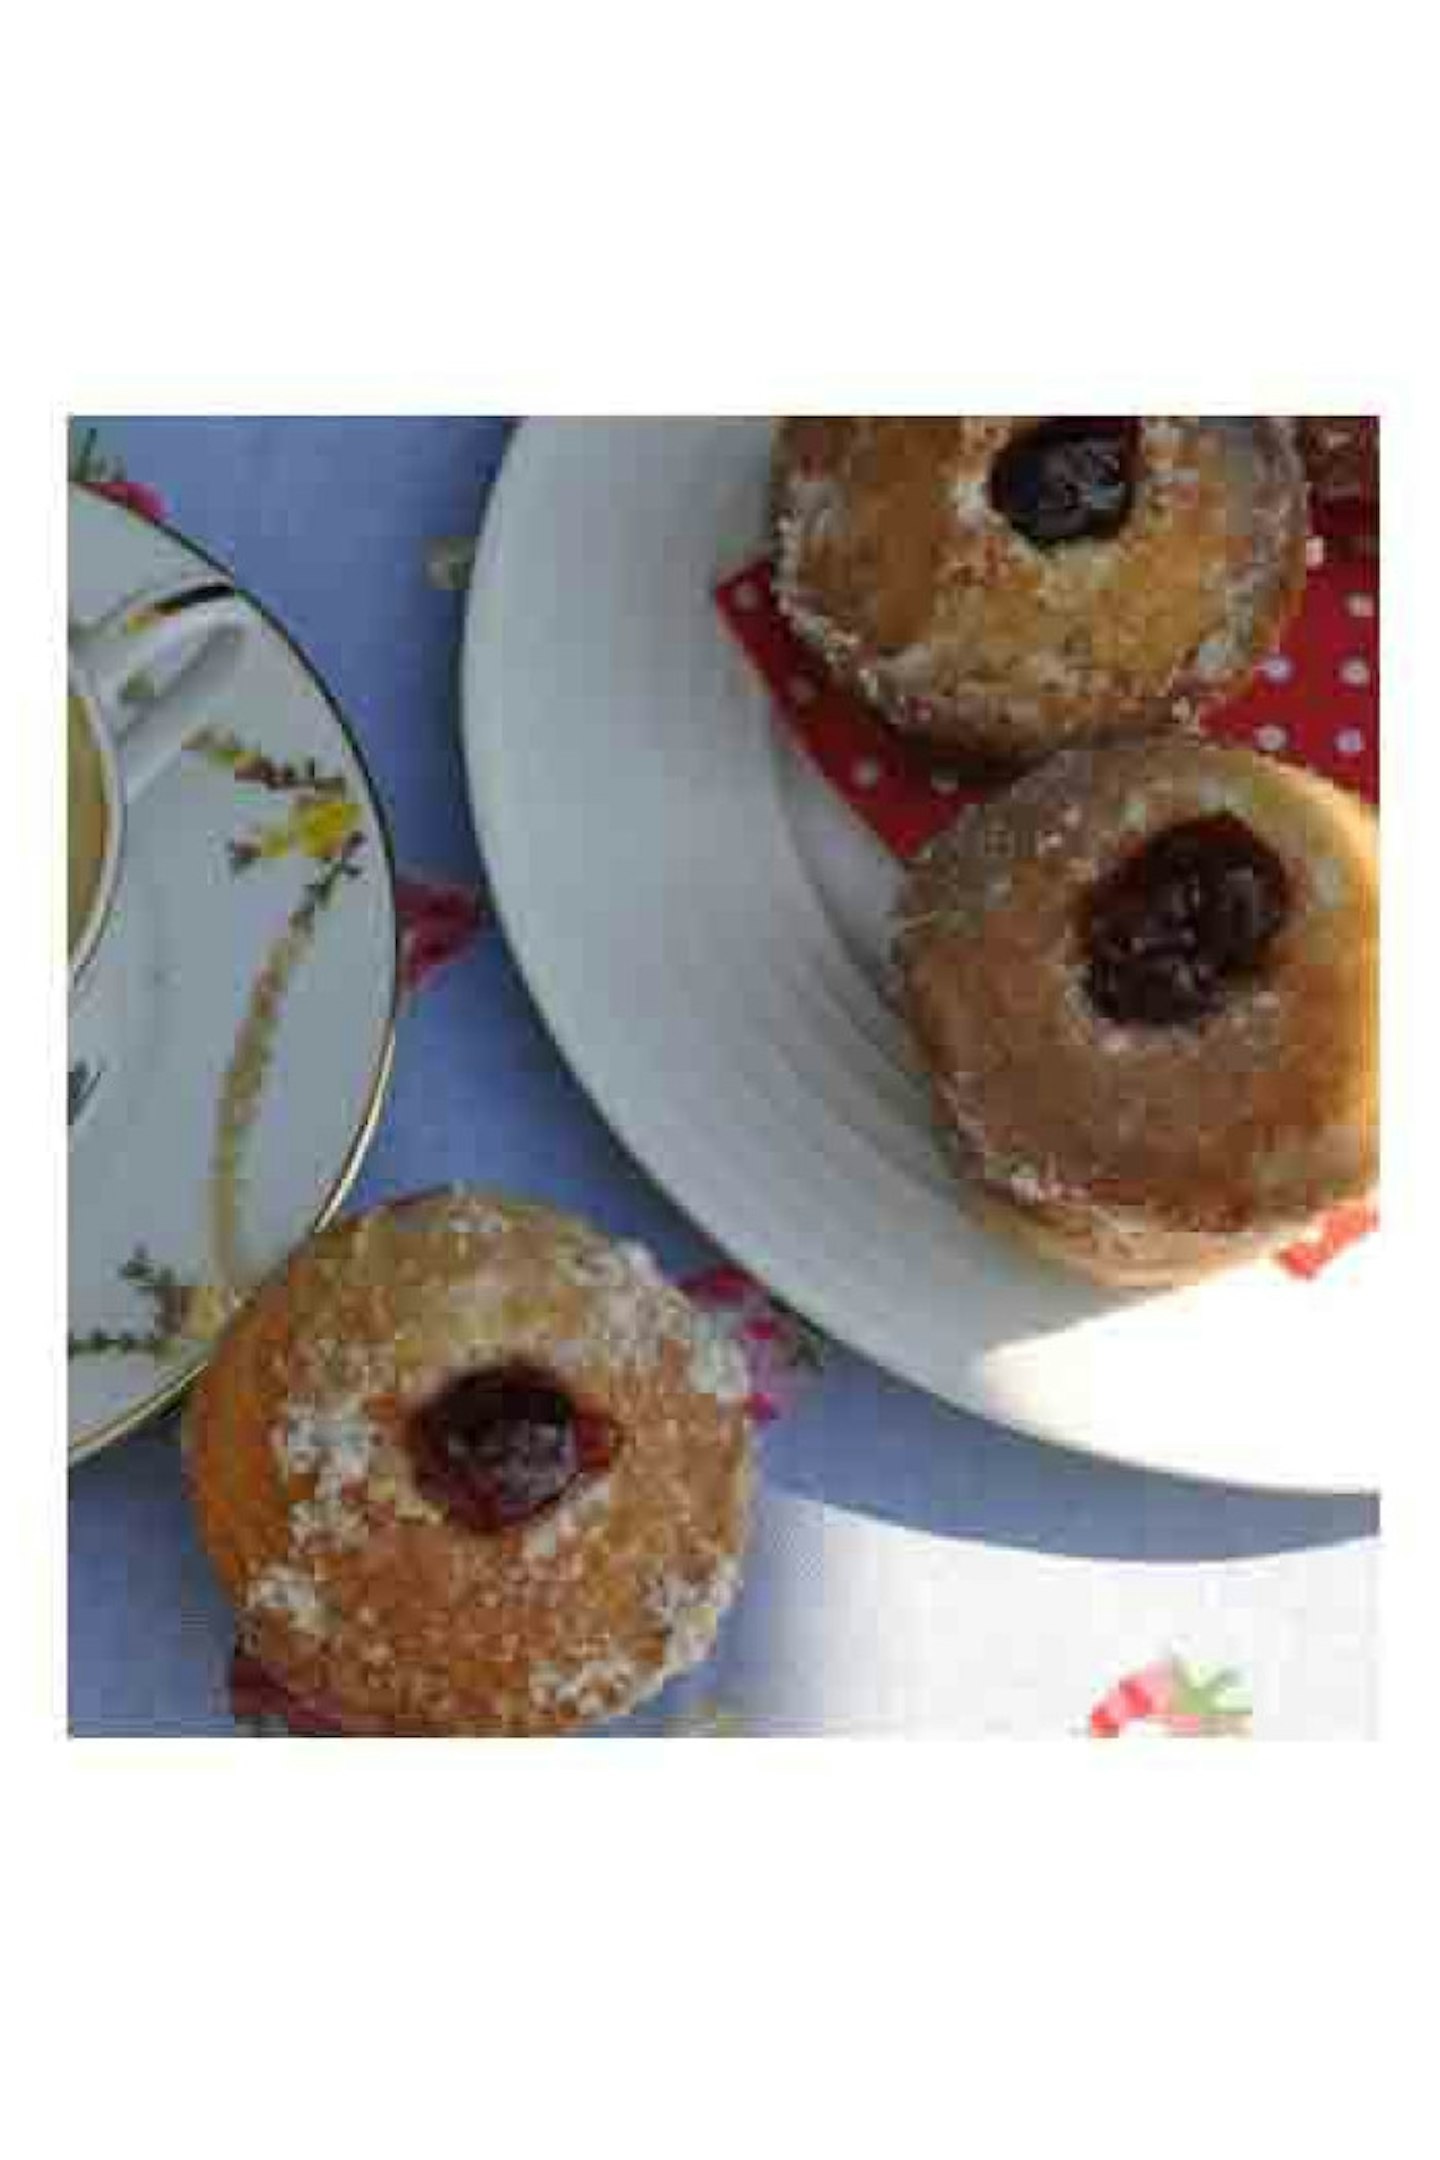 11. THE DUFFIN